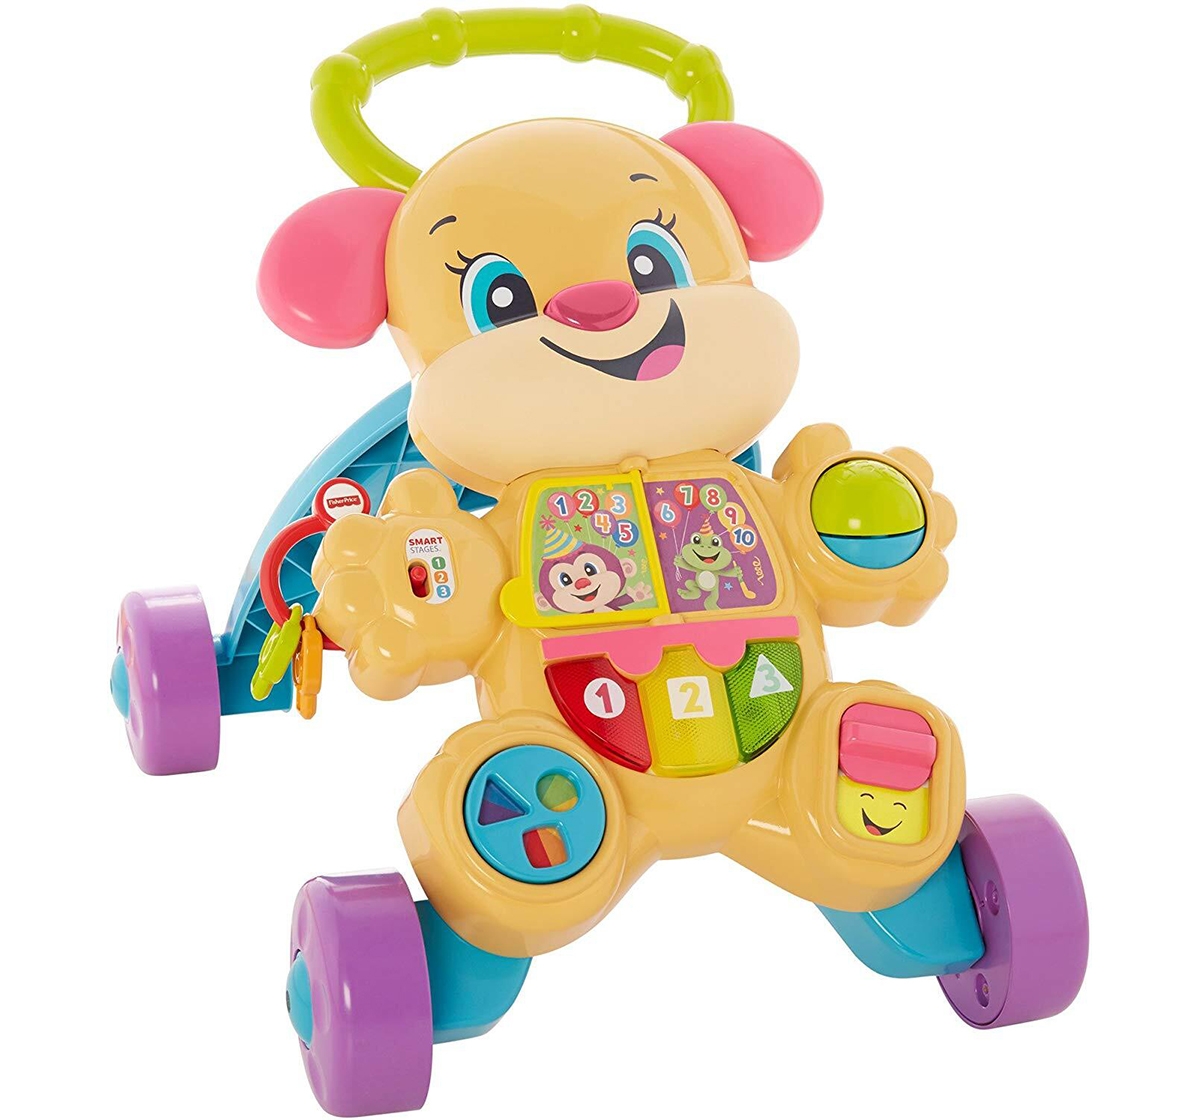 Fisher-Price | Fisher Price Laugh And Learn Smart Stages Learn With Sis Walker, Multi Color Baby Gear for Kids age 6M+ 0